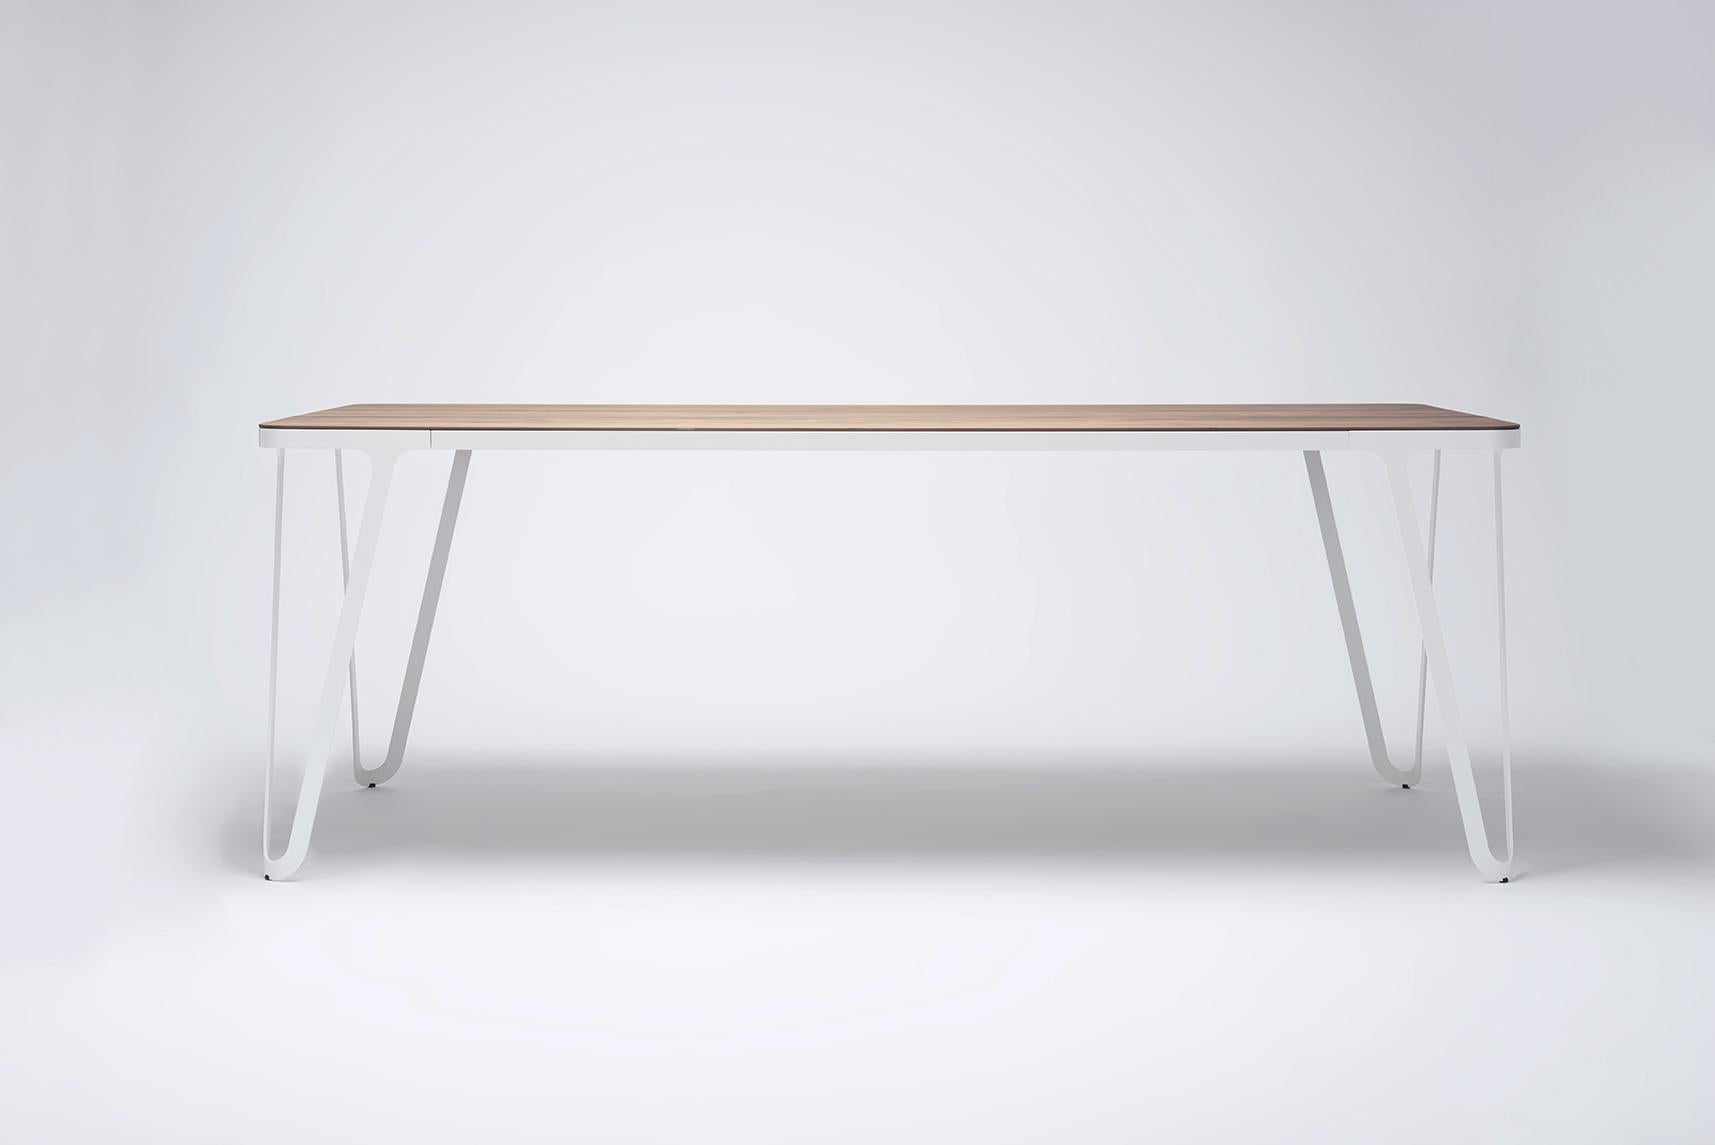 Loop table 240 ash by Sebastian Scherer
Dimensions: D240 x W90 x H74 cm
Materials: ash, aluminium, wood
Weight: 69.2 kg
Also available: colours:solid wood (matt lacquered or oiled): black and white stained ash / natural oak / american